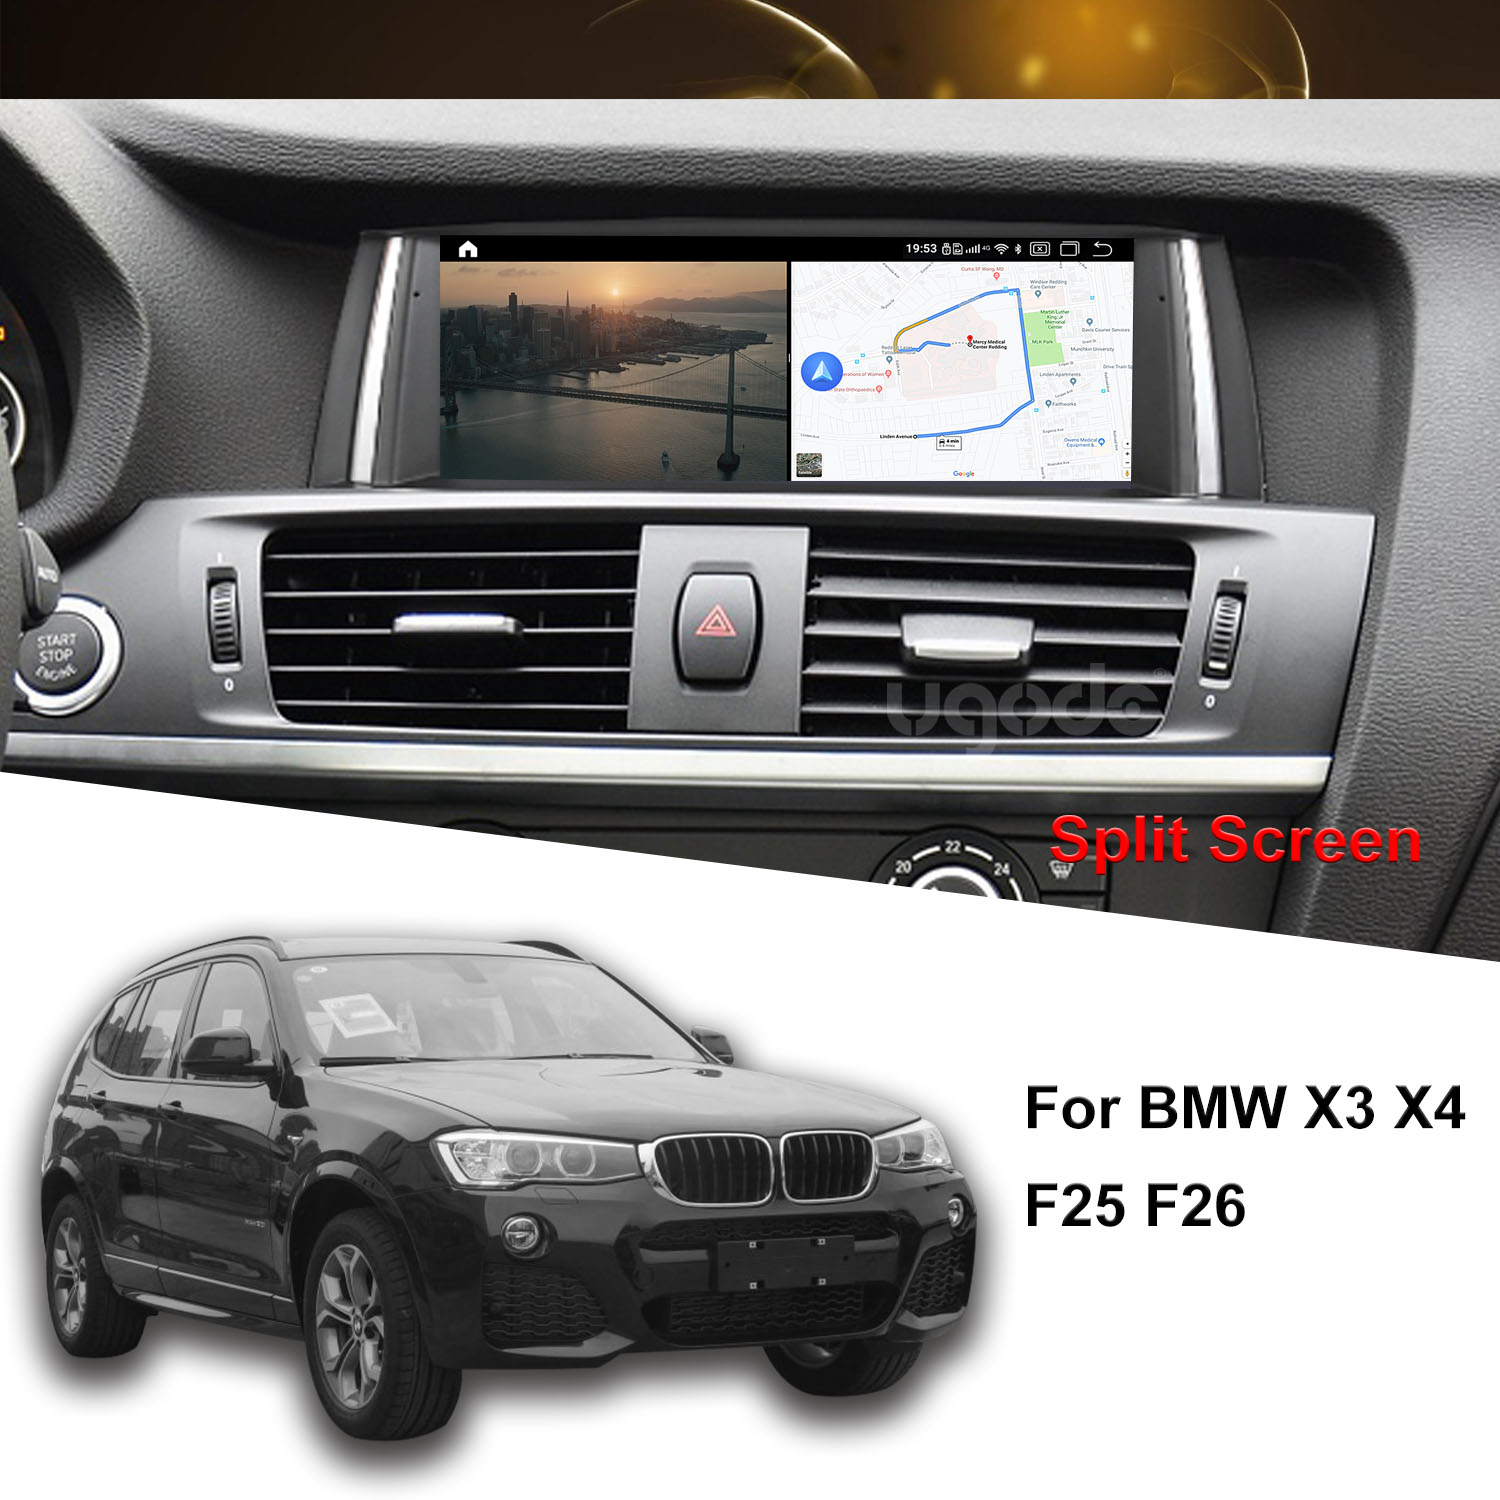 China For BMW X3 F25 X4 F26 Android Screen Upgrade Stereo CarPlay